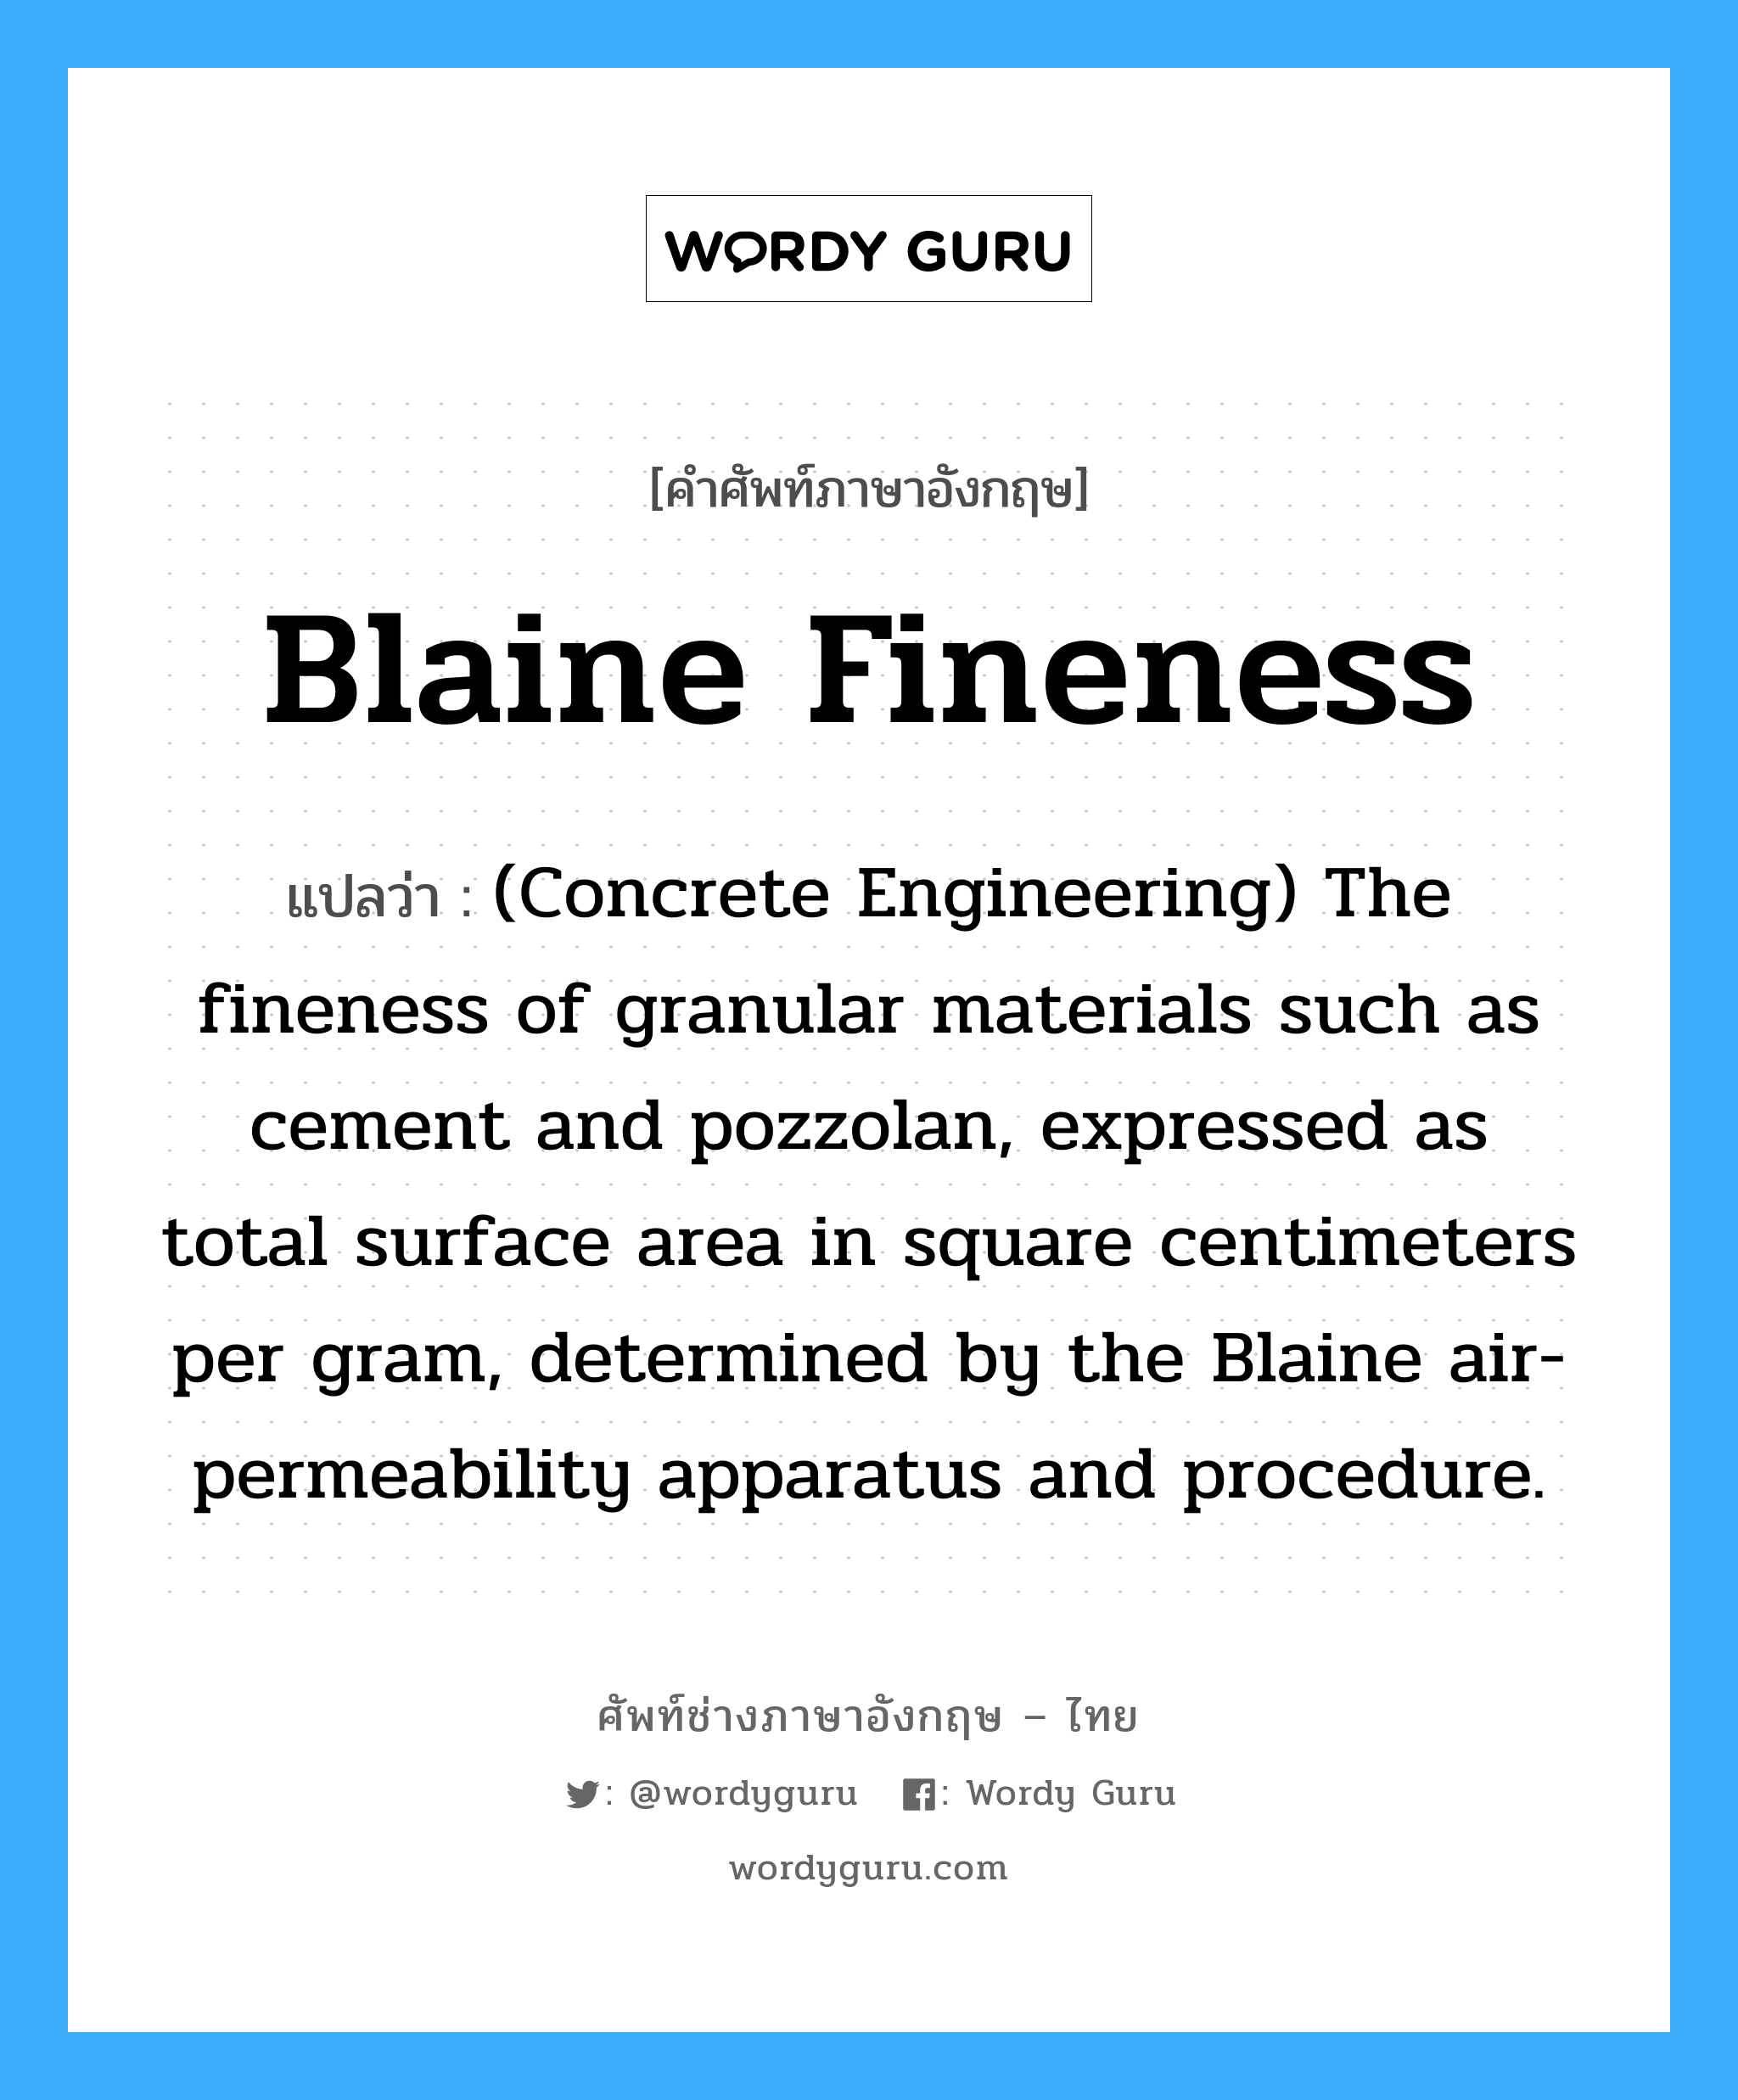 Blaine Fineness แปลว่า?, คำศัพท์ช่างภาษาอังกฤษ - ไทย Blaine Fineness คำศัพท์ภาษาอังกฤษ Blaine Fineness แปลว่า (Concrete Engineering) The fineness of granular materials such as cement and pozzolan, expressed as total surface area in square centimeters per gram, determined by the Blaine air-permeability apparatus and procedure.